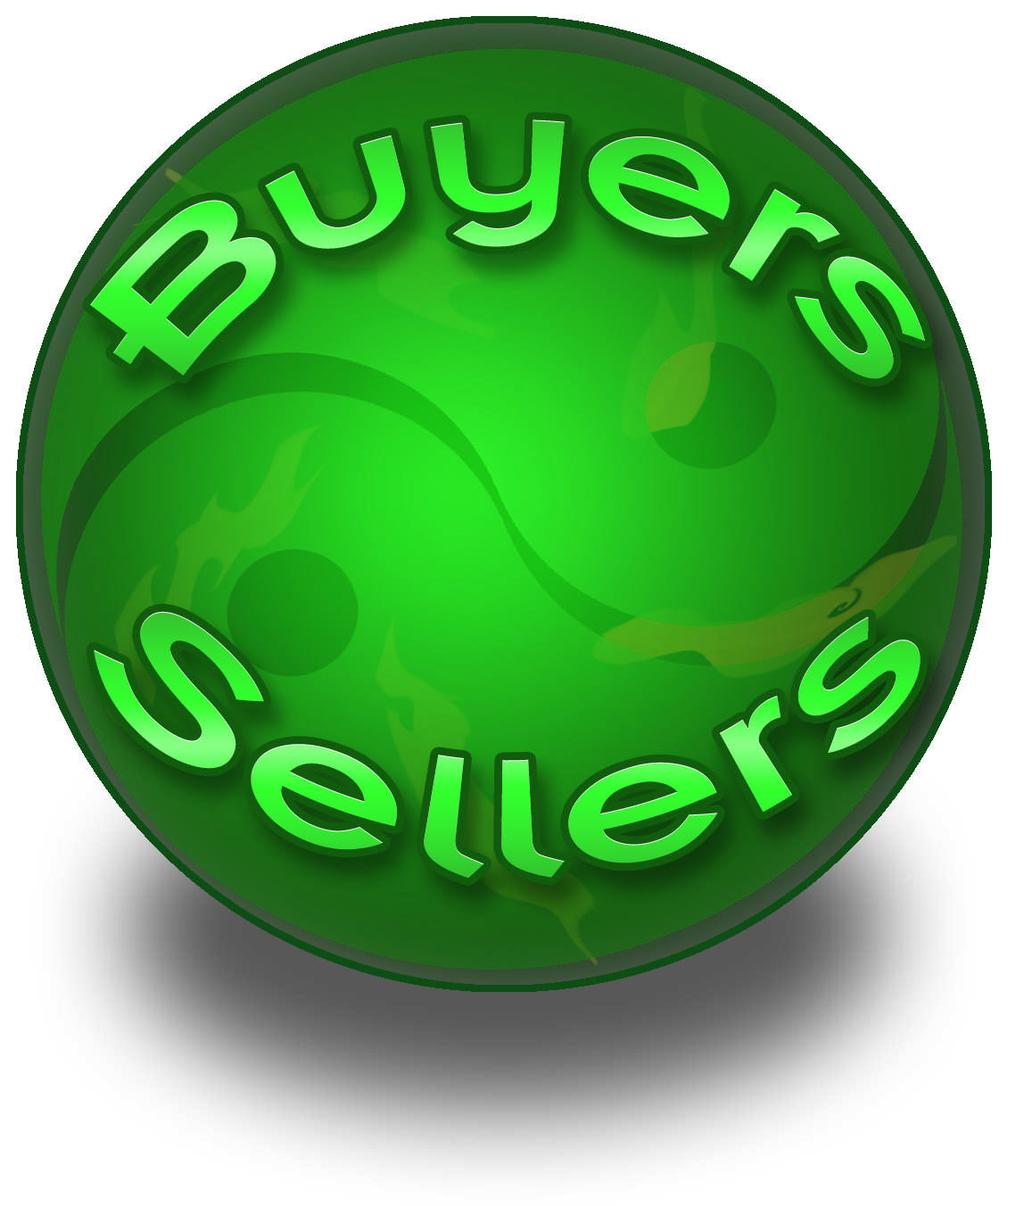 More Buyers Yield More Sellers